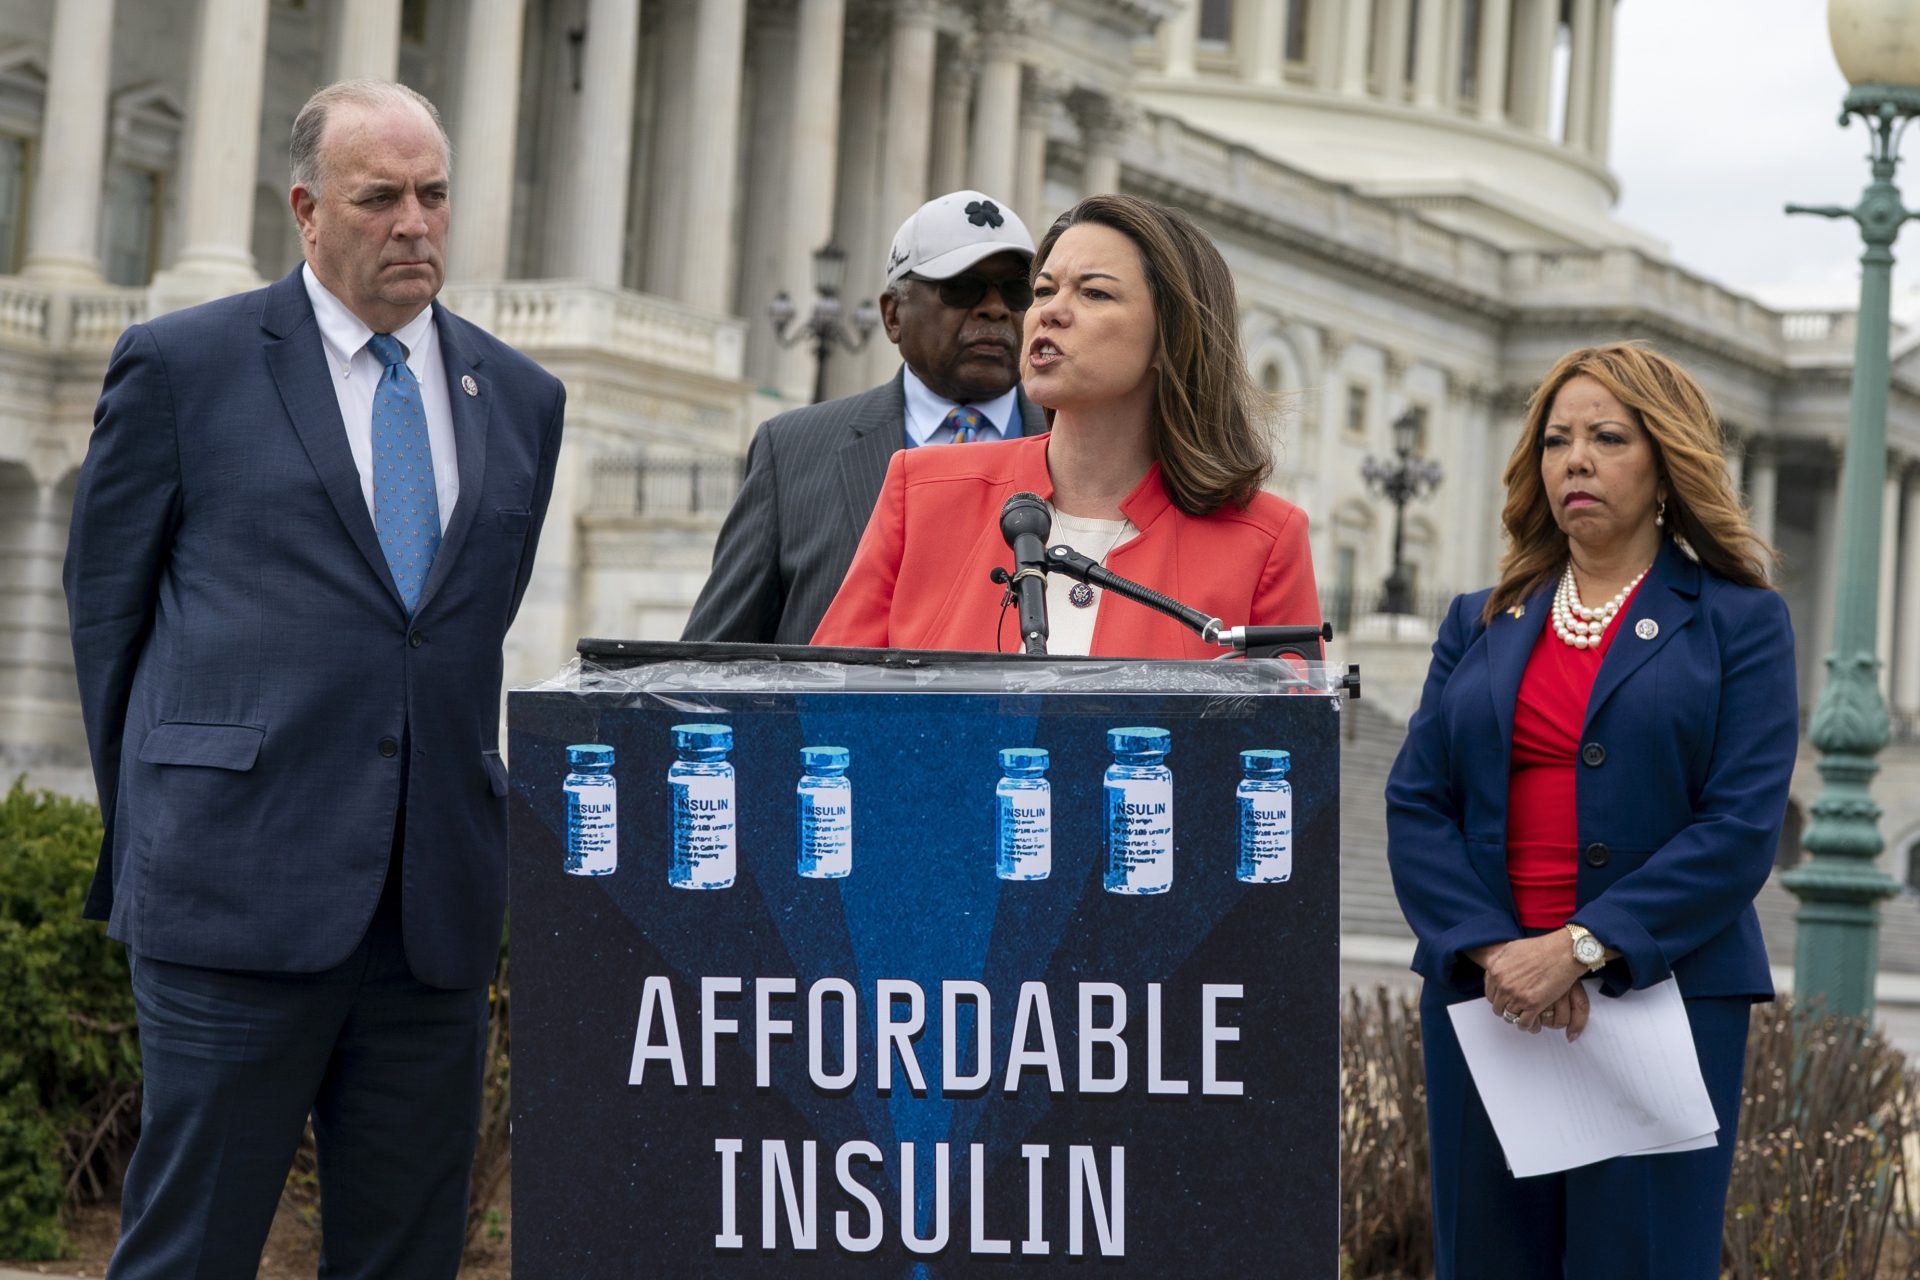 From left, Rep. Dan Kildee, D-Mich., House Majority Whip James Clyburn, D-S.C., Rep. Angie Craig, D-Minn., and Rep. Lucy McBath, Ga., talk about their support for legislation aimed at capping the price of insulin, at the Capitol in Washington, Thursday, March 31, 2022.